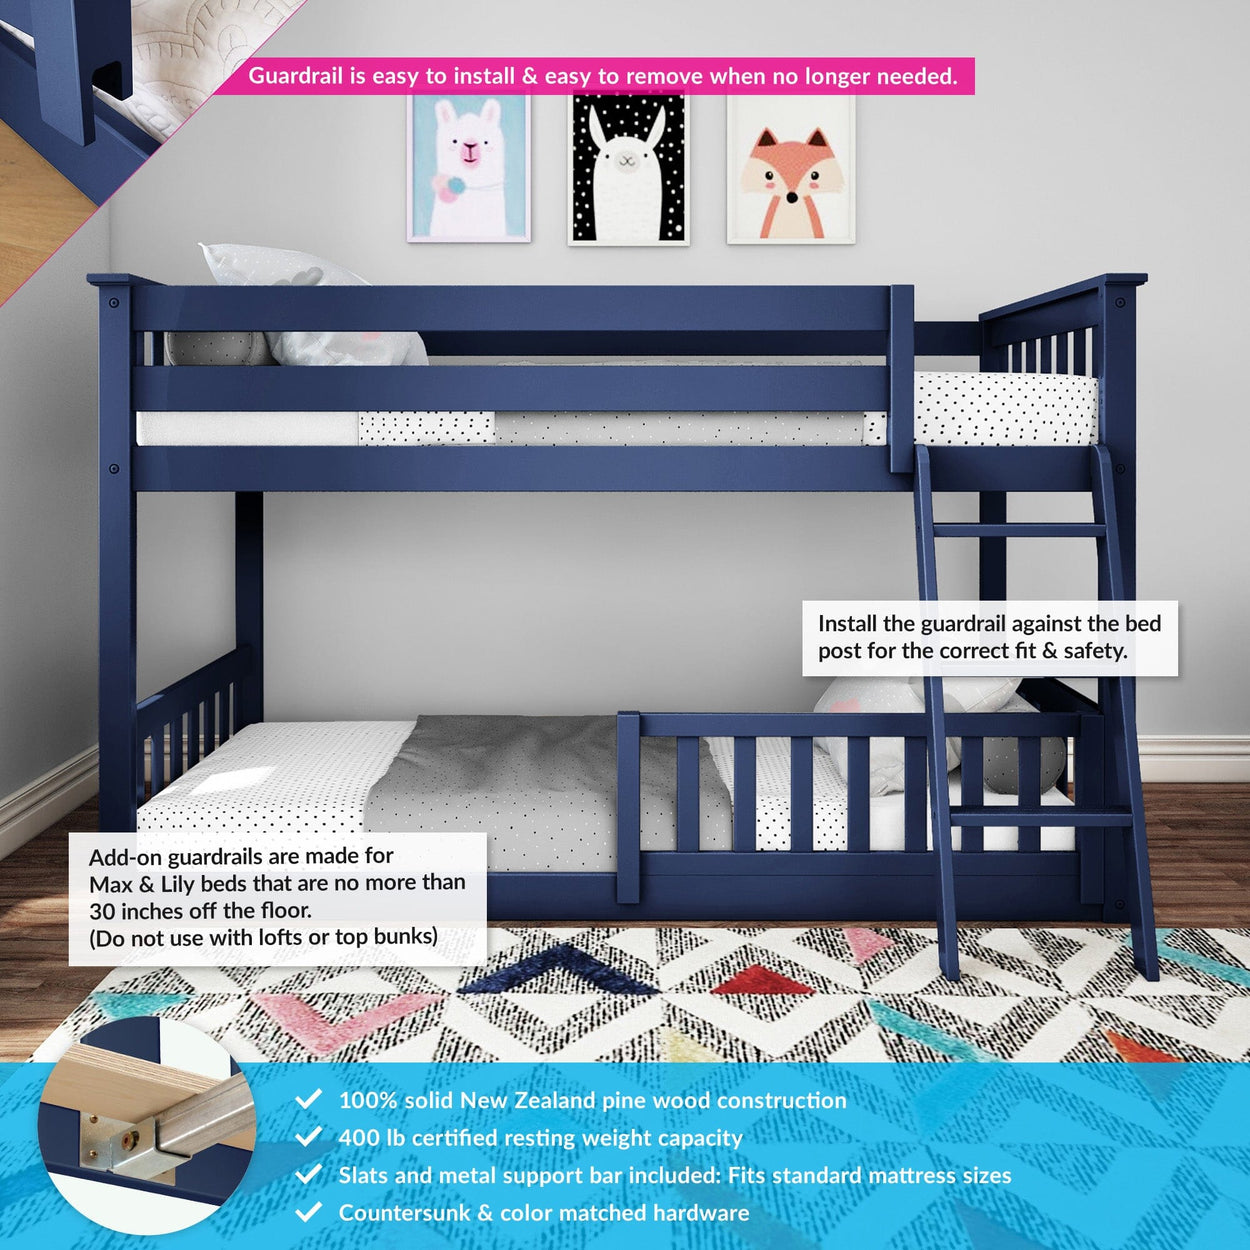 180214131109 : Bunk Beds Twin over Twin Low Bunk with Single Guard Rail, Blue